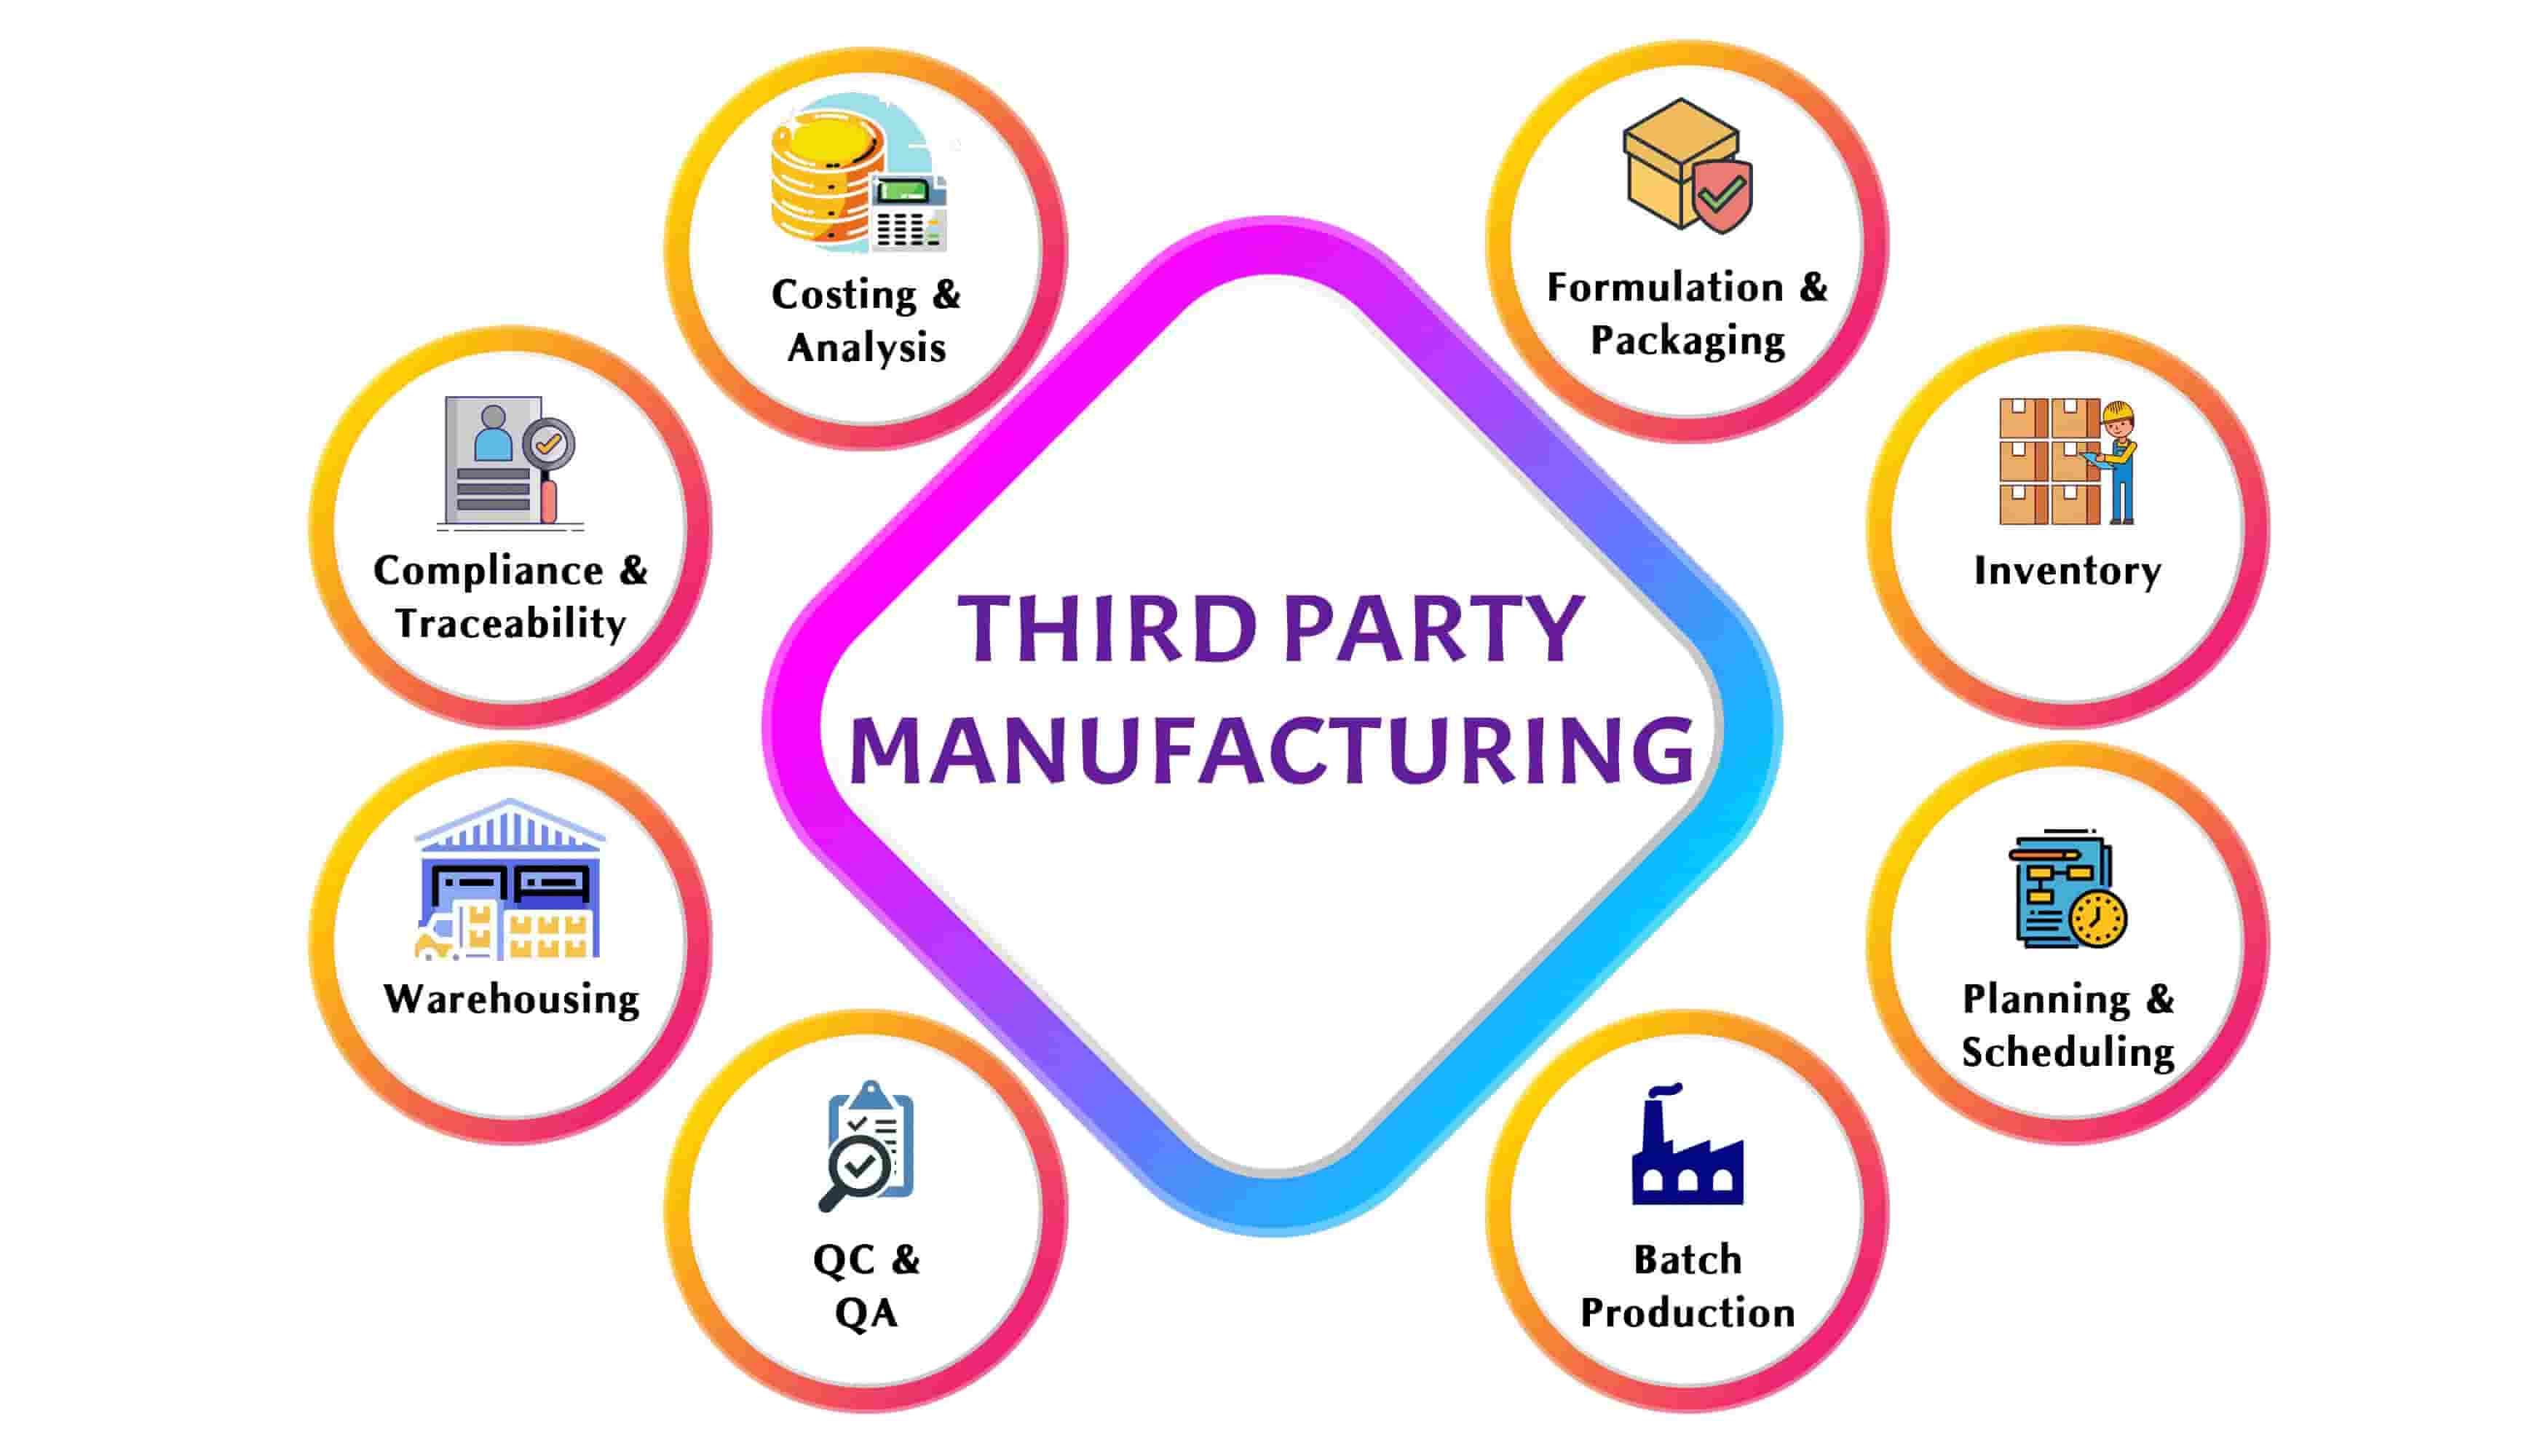 Third party manufacturing